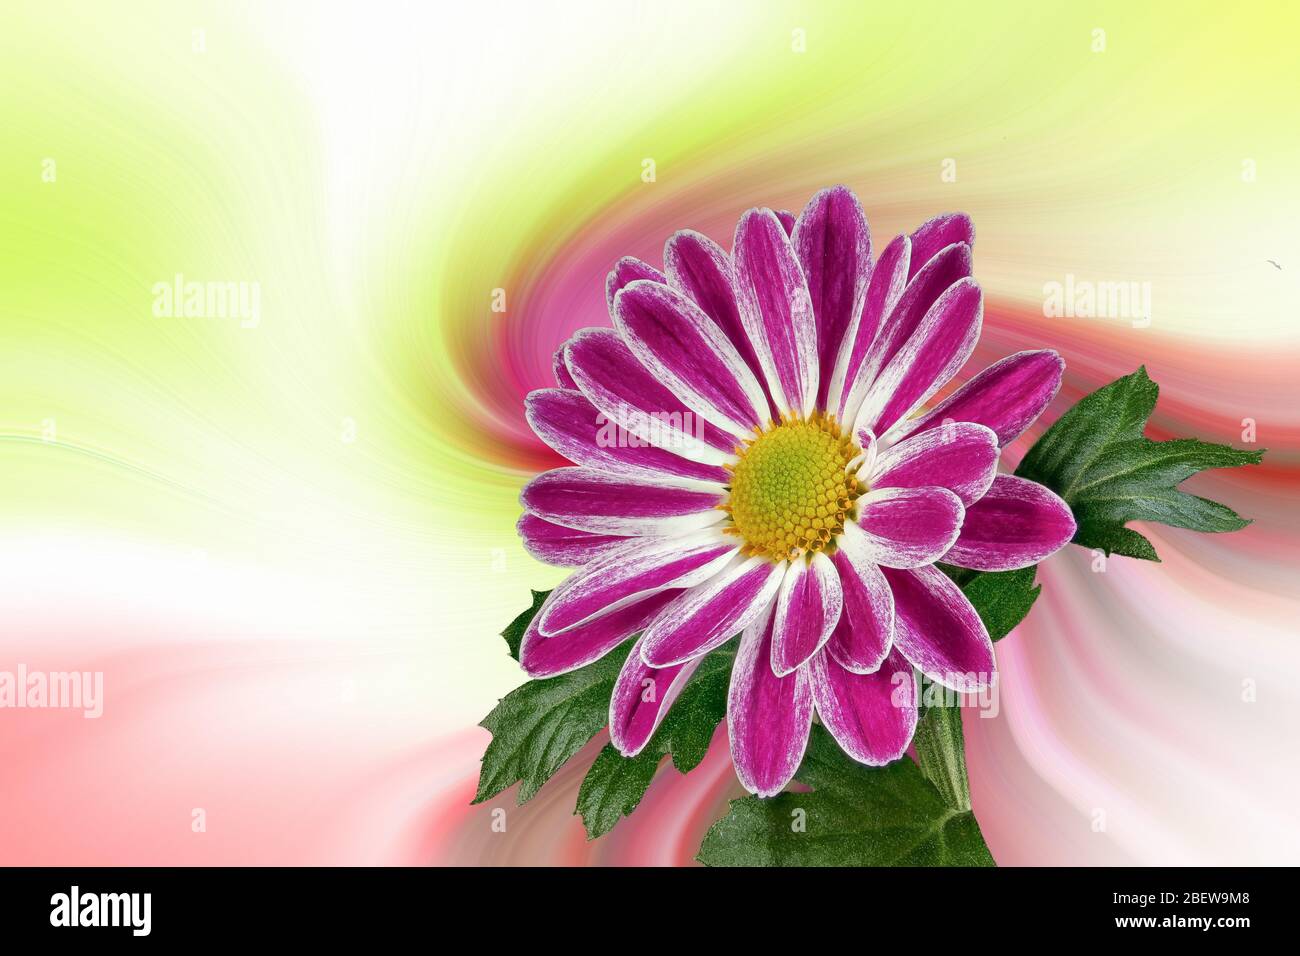 Margerites (Leucanthemum) against an abstract background. Stock Photo